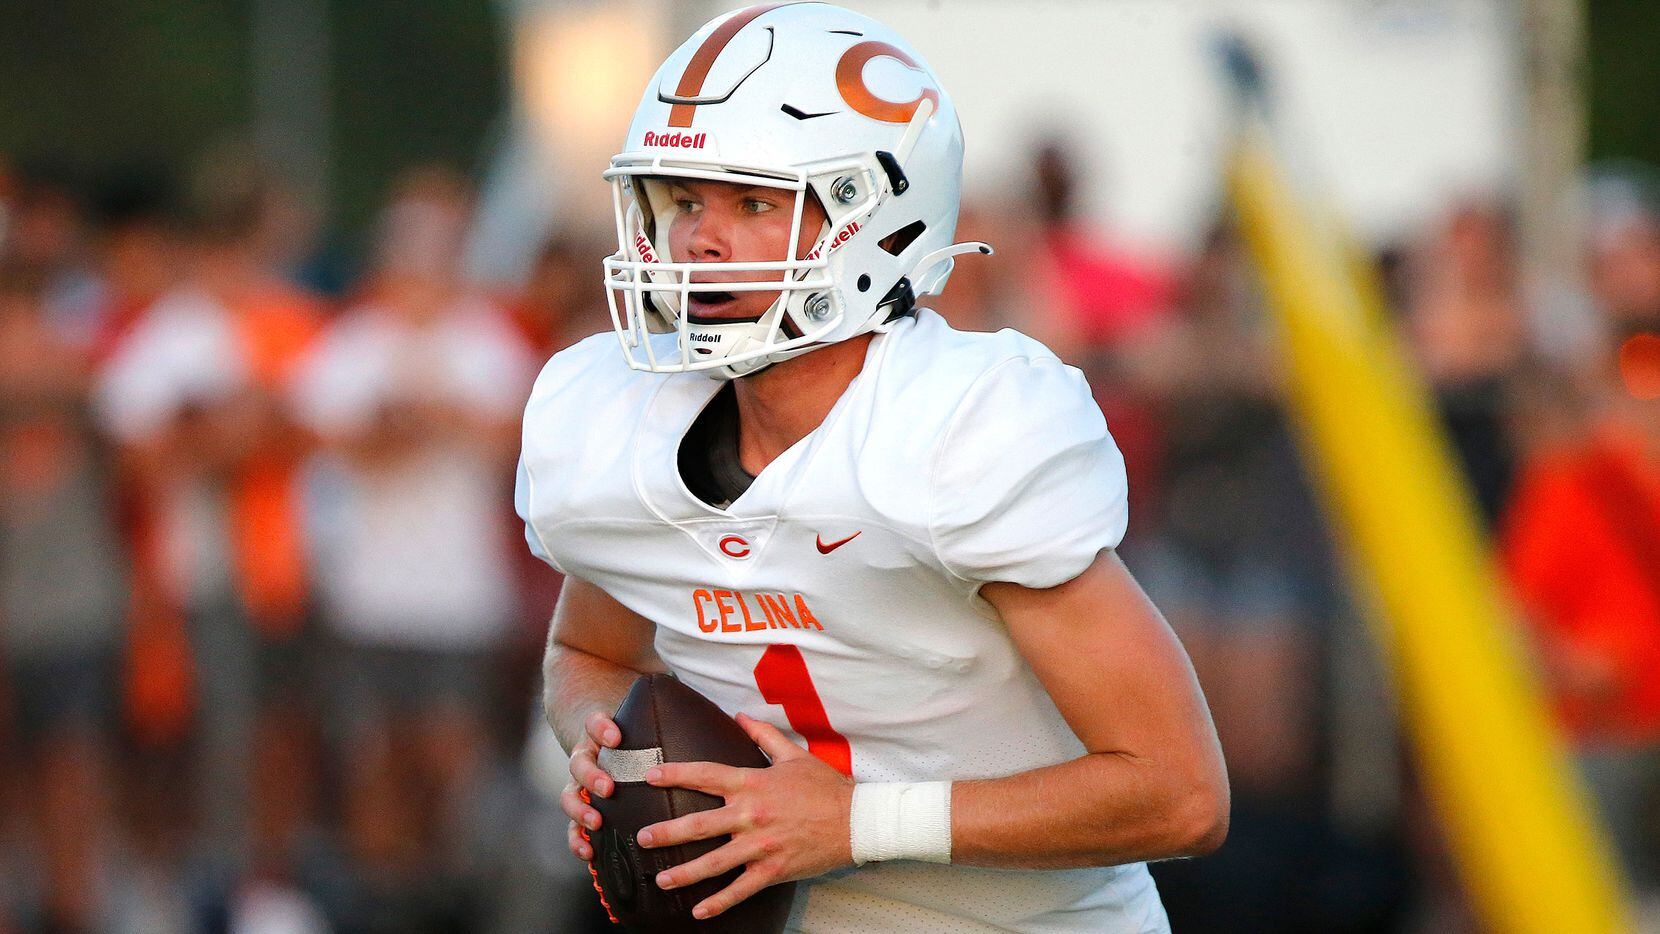 Celina High School quarterback Noah Bentley (1) rolls out to pass during the second half as Melissa High School hosted Celina High School at Cardinal Field in Melissa on Friday night, August 27, 2021. (Stewart F. House/Special Contributor)